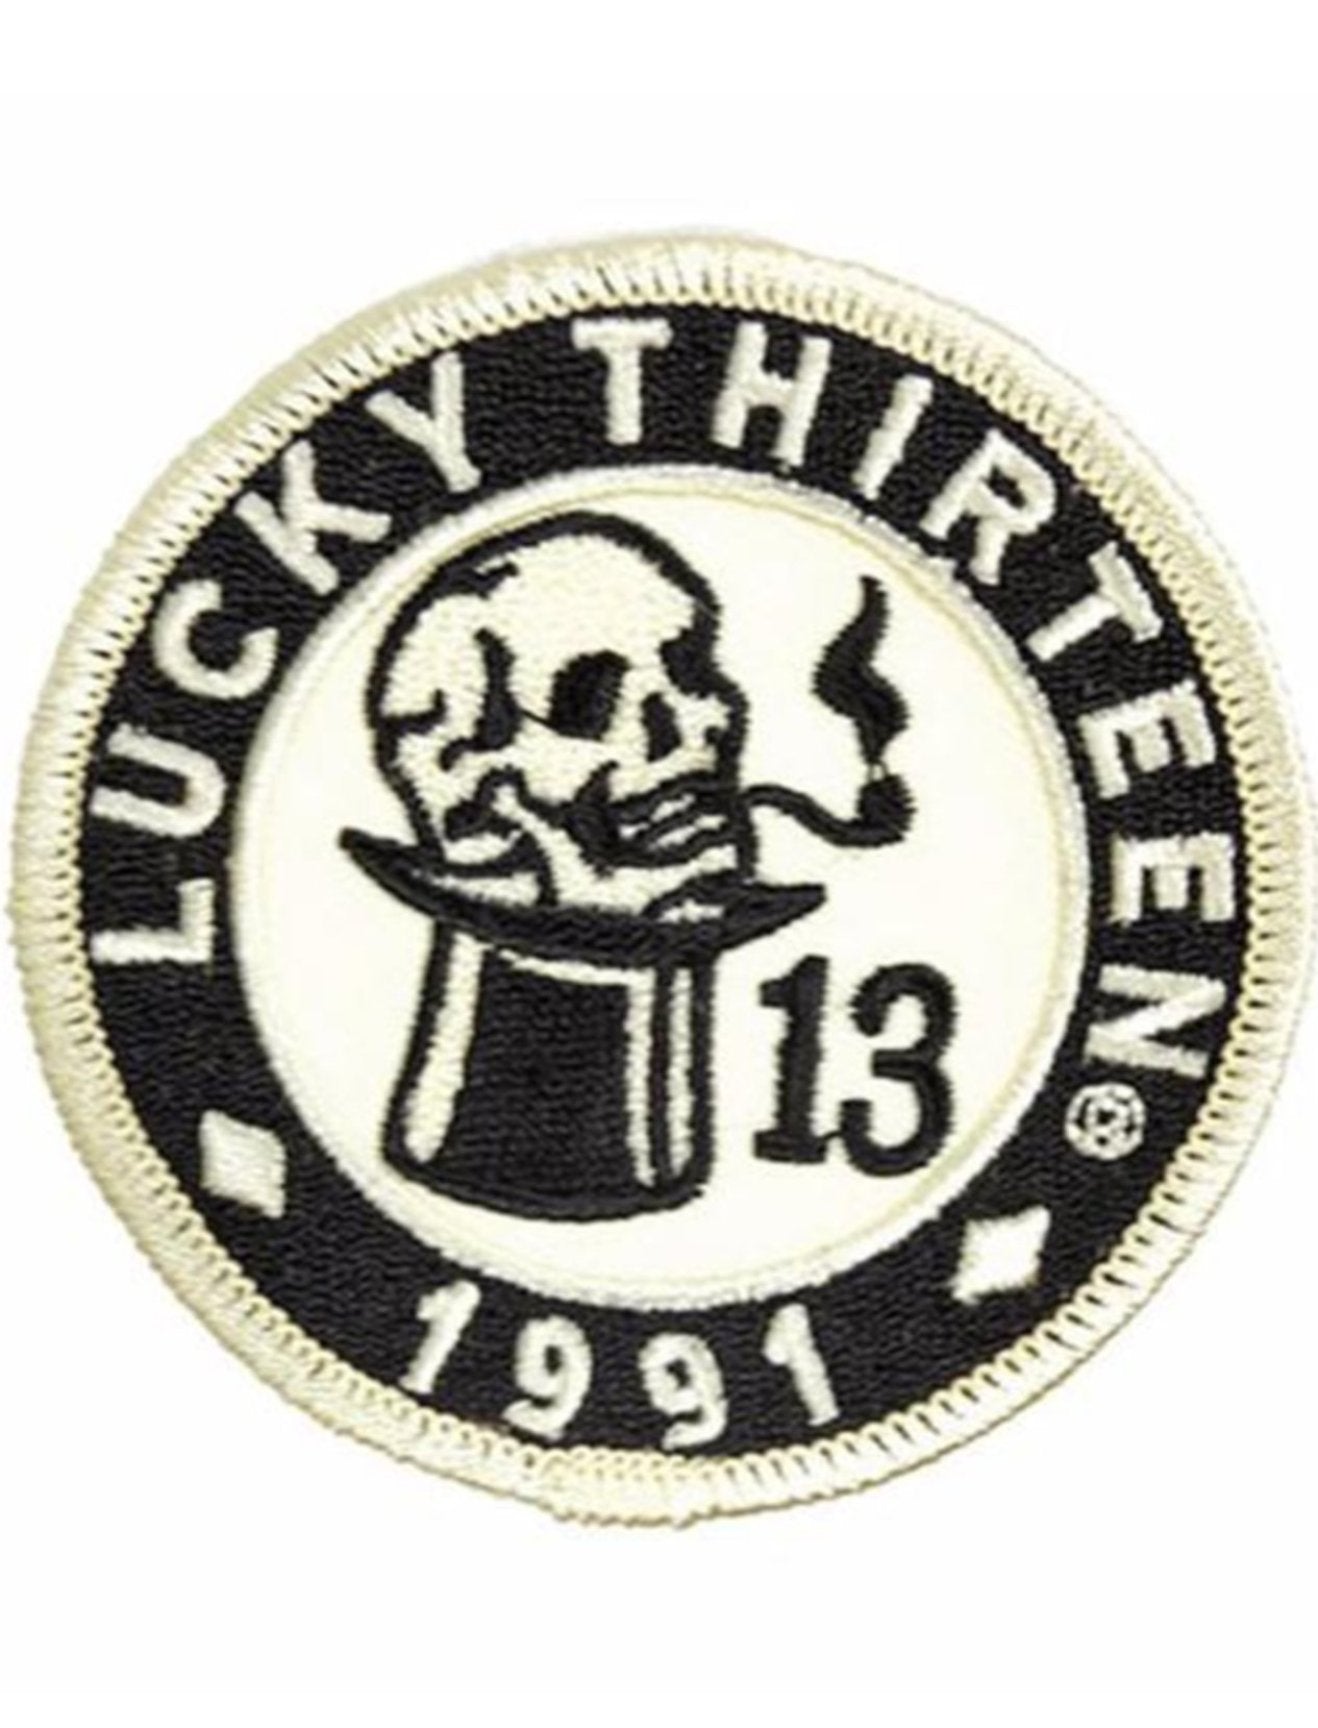 The SMOKER 13 Patch